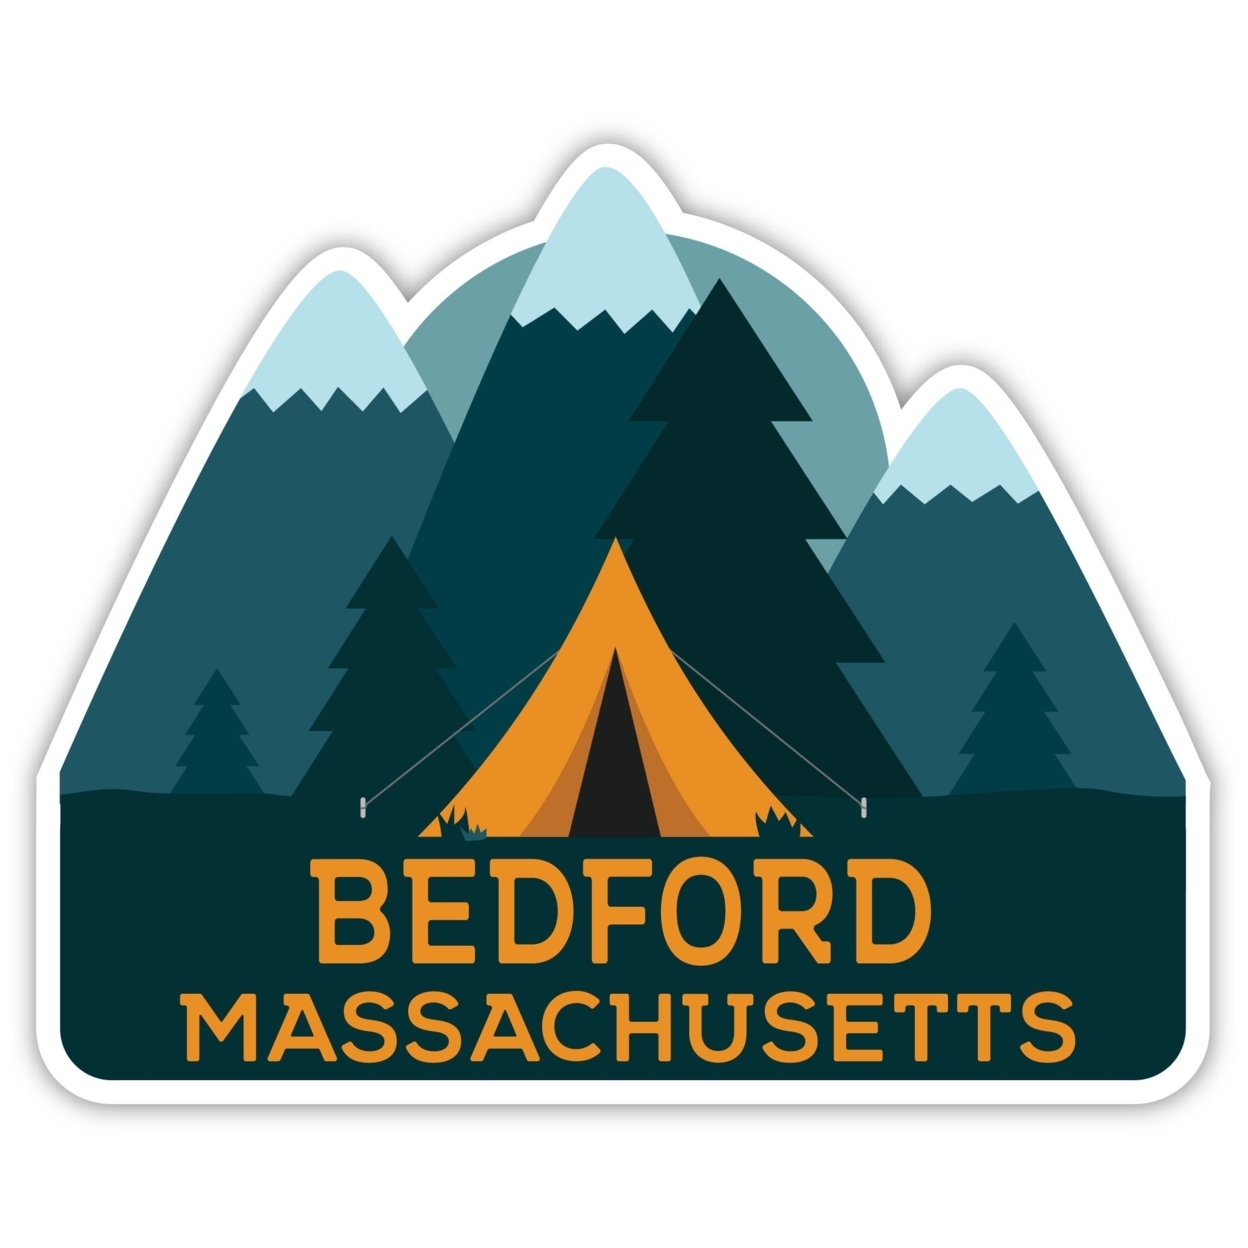 Bedford Massachusetts Souvenir Decorative Stickers (Choose Theme And Size) - 4-Pack, 10-Inch, Tent